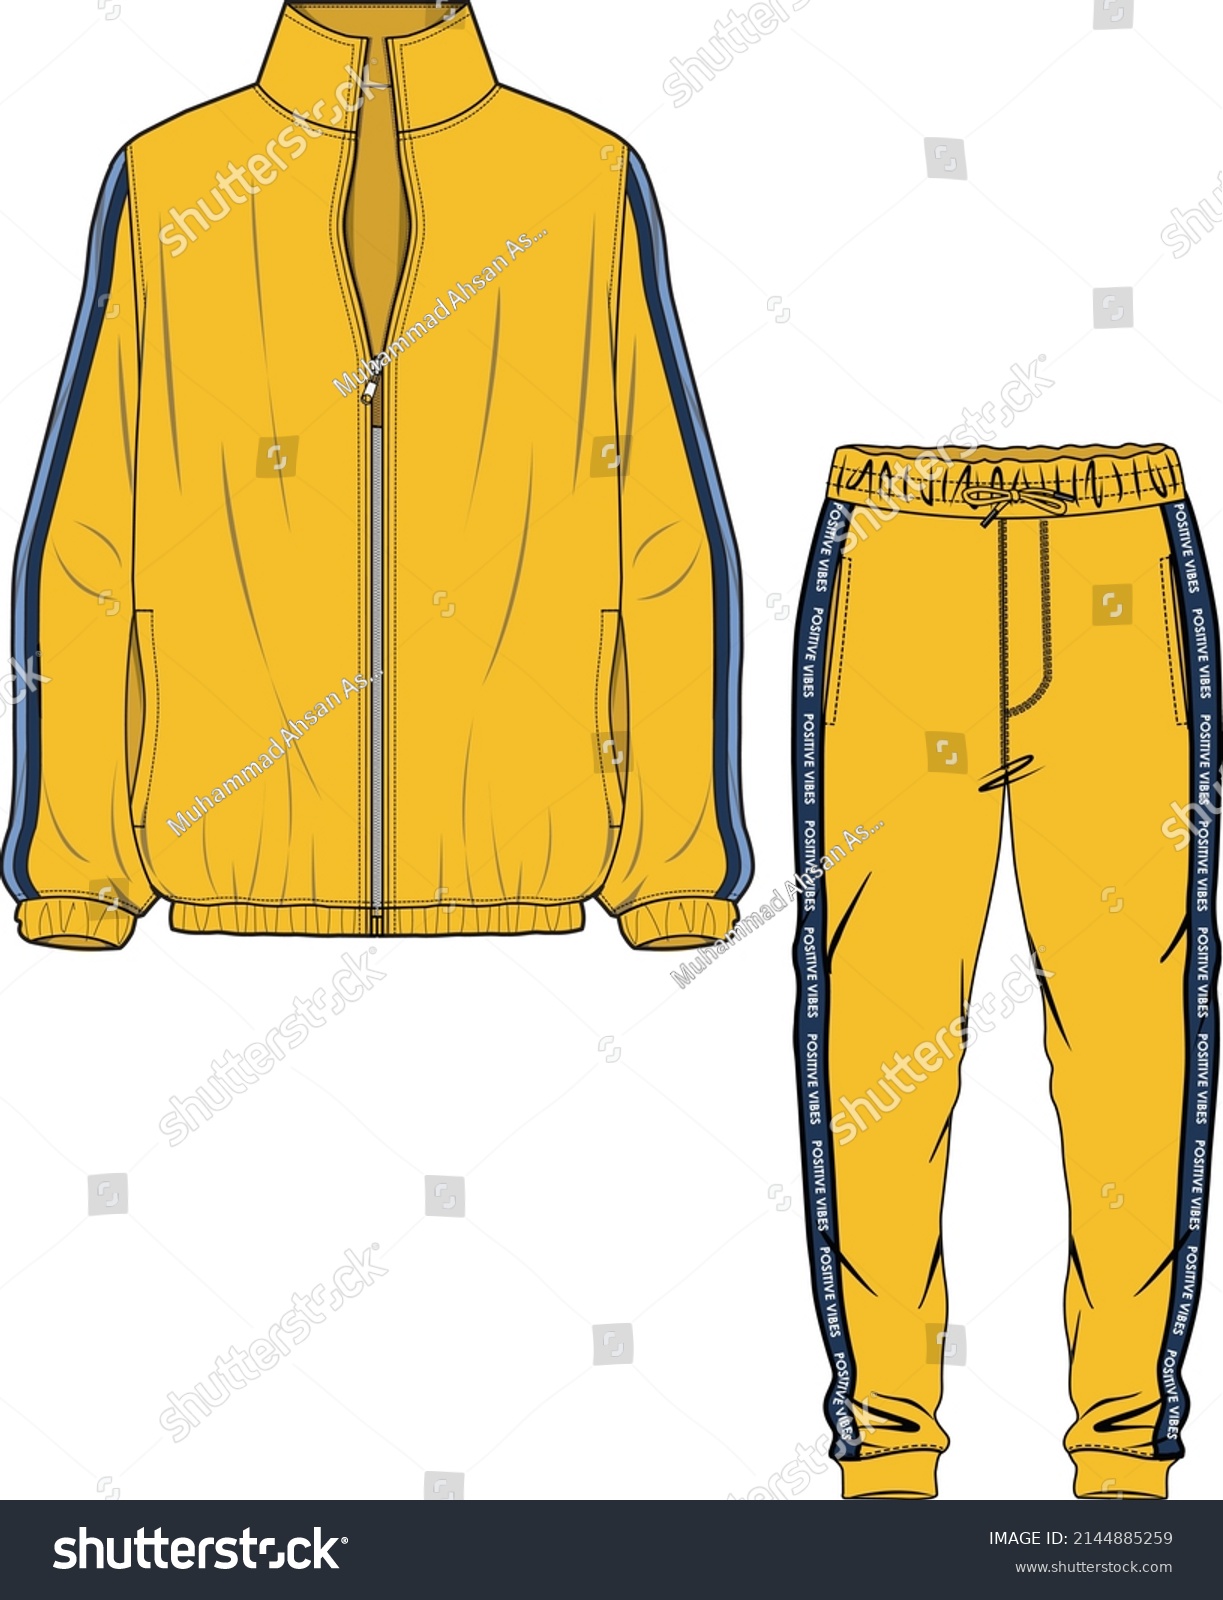 SVG of TRACK SUIT JACKET AND JOGGERS SET FOR MEN AND BOYS SPORTS WEAR VECTOR svg